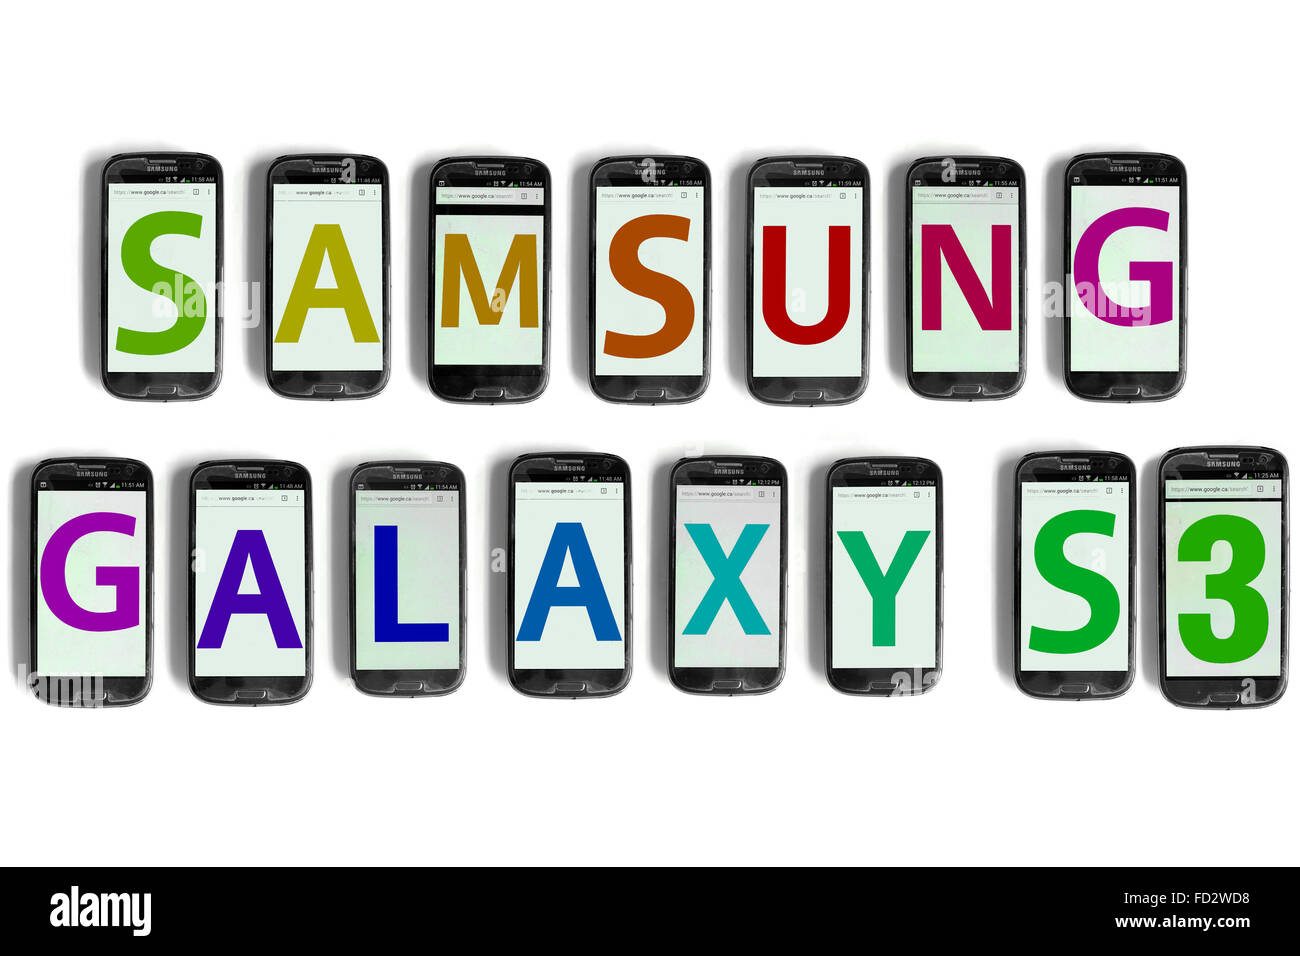 Samsung Galaxy S3 spelled on the screens of smartphones photographed against a white background. Stock Photo